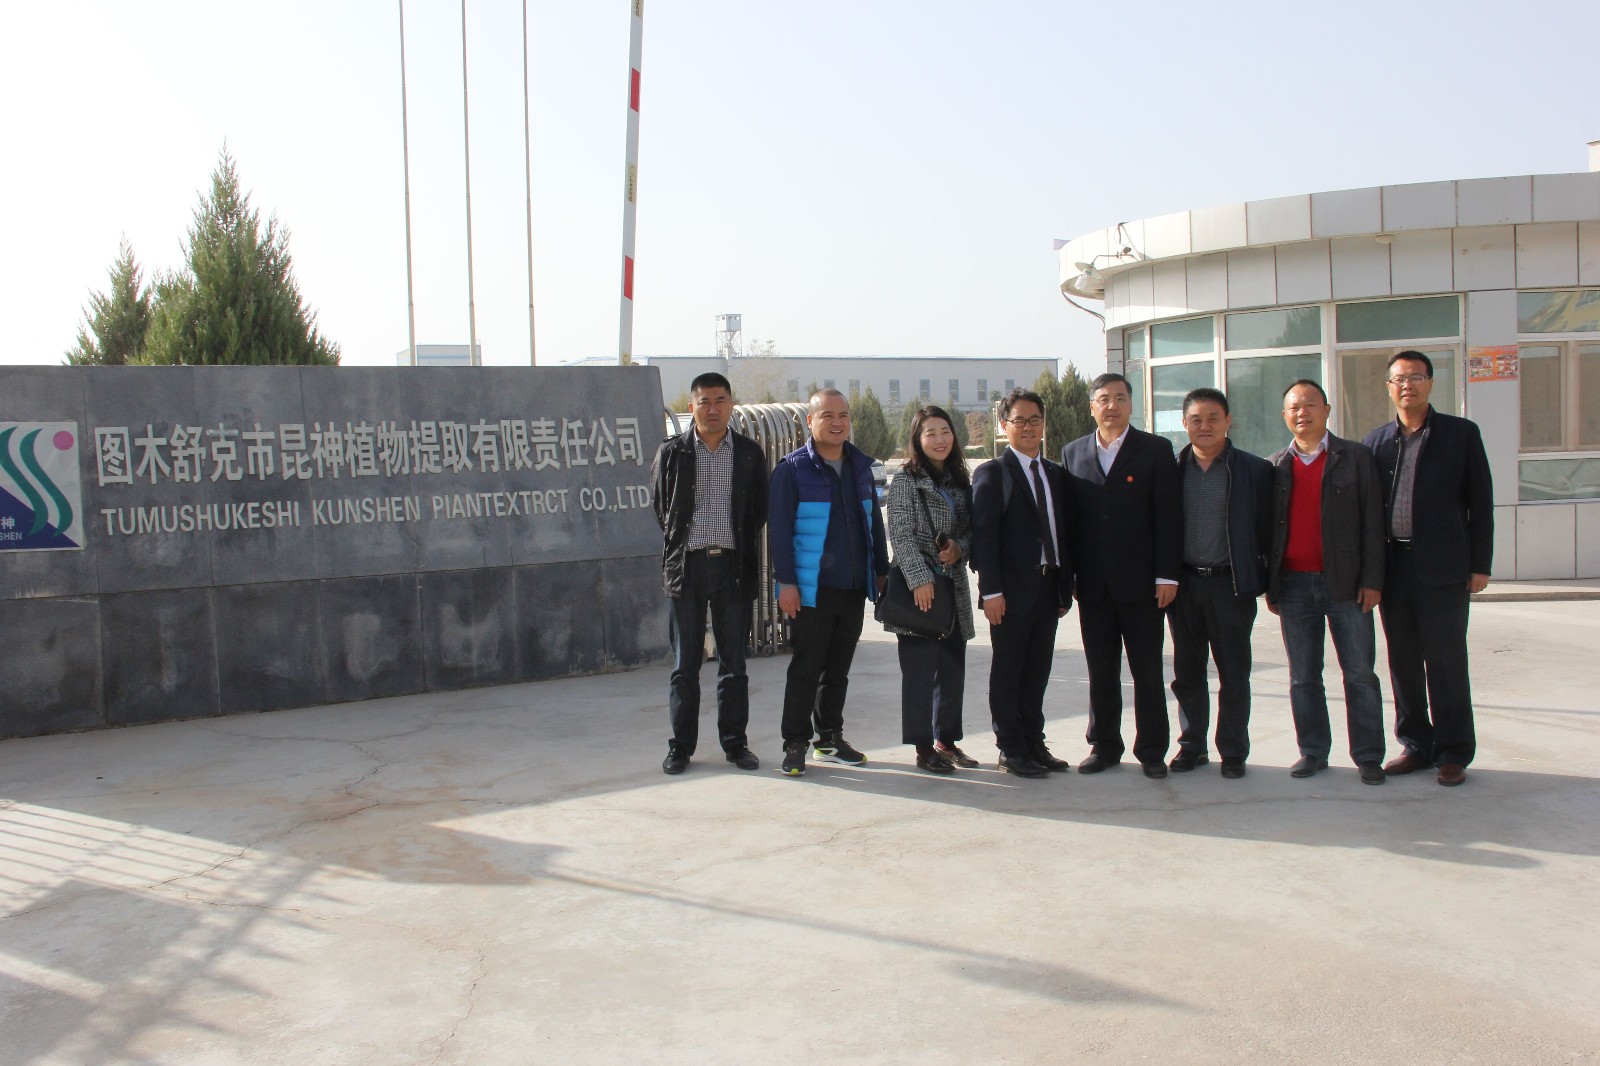 Korean customers visit the licorice planting base and production plant of xi 'an fuzhengyuan biotechnology co., LTD